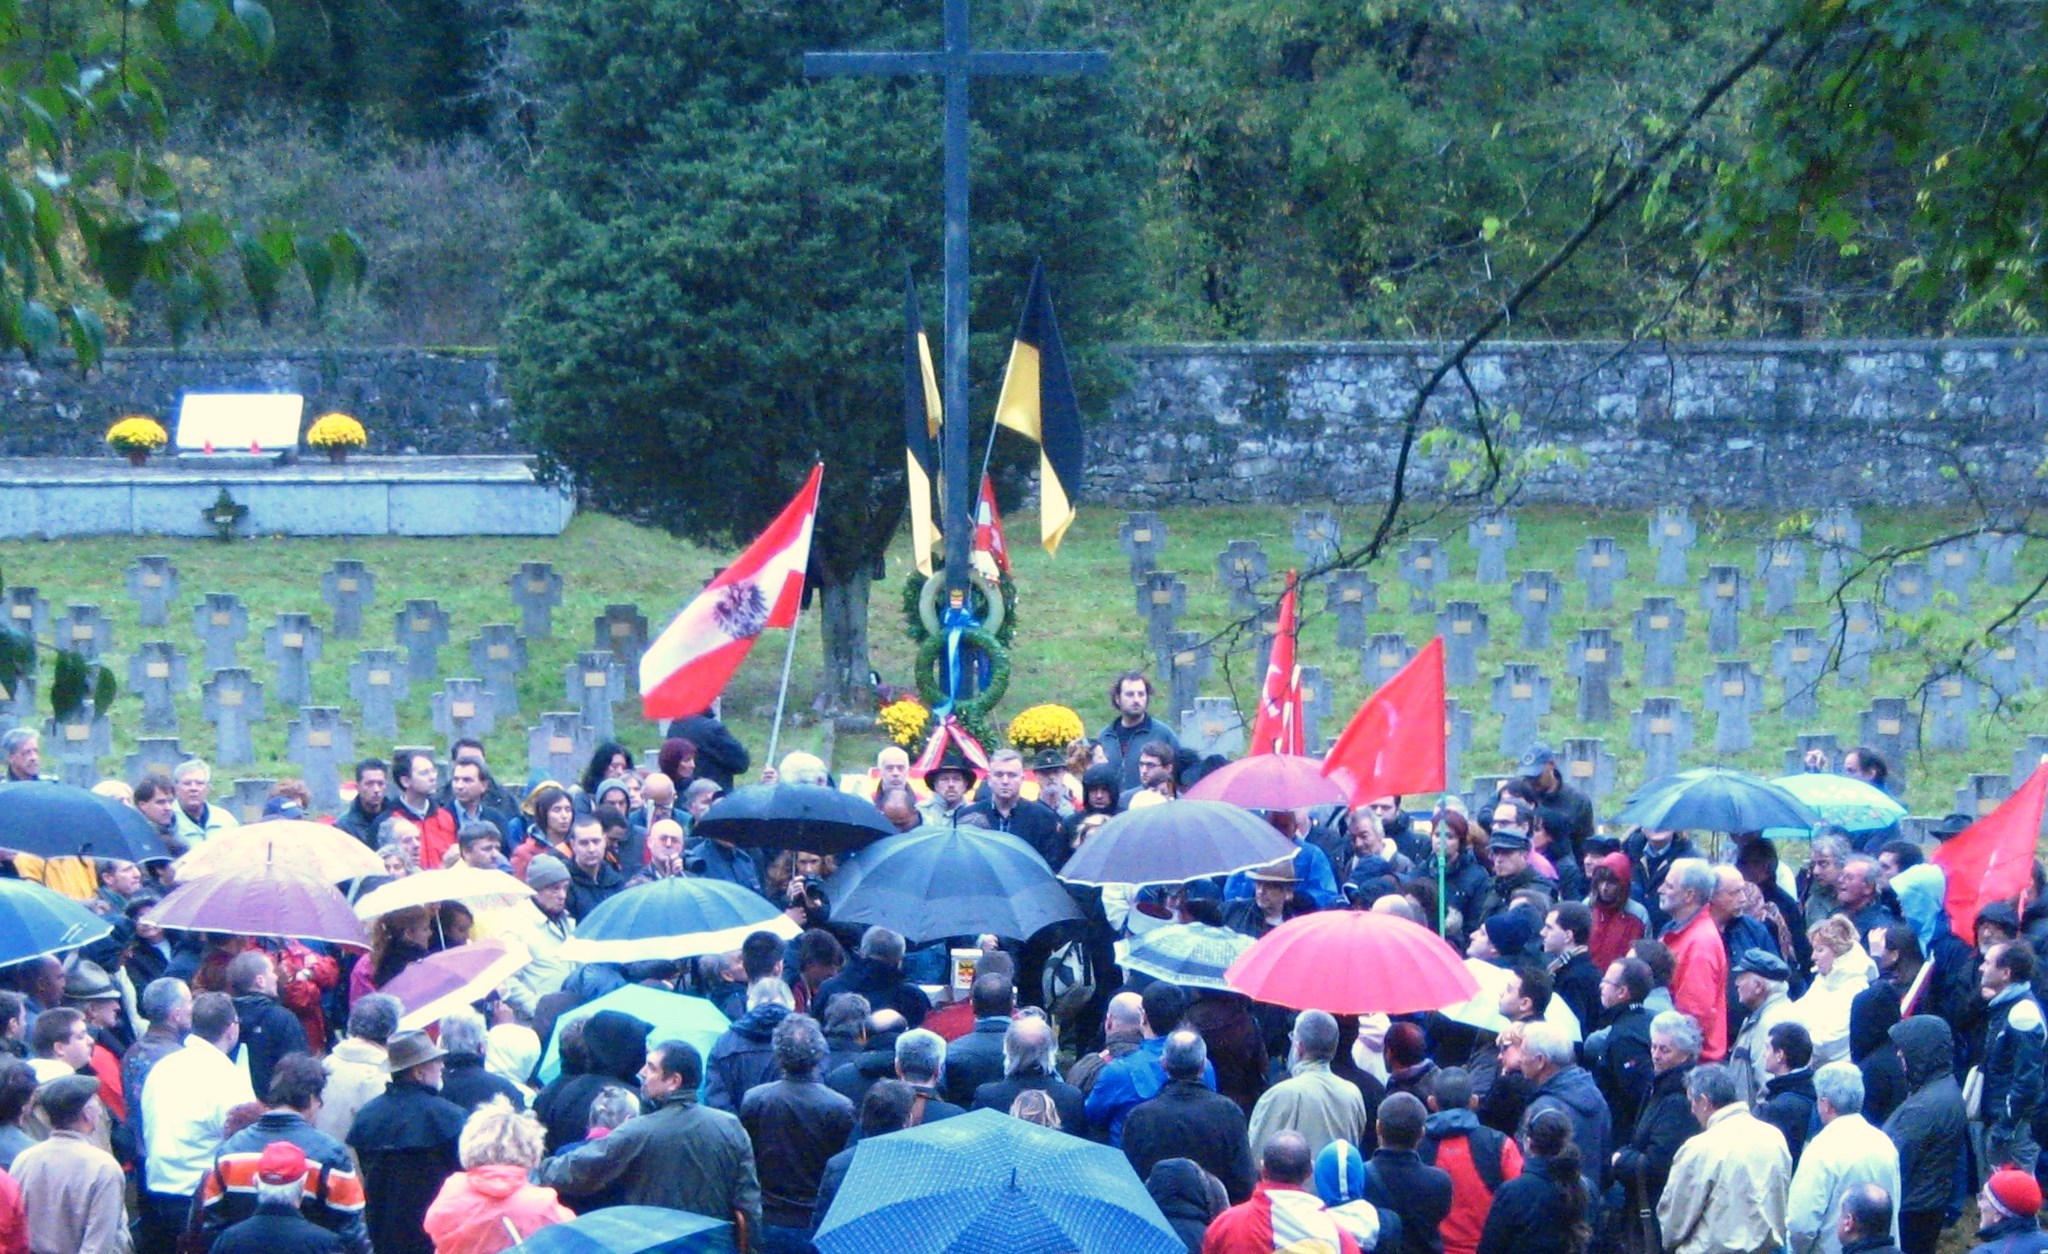 The people of Mitteleuropa remember together the fallen of the Great War